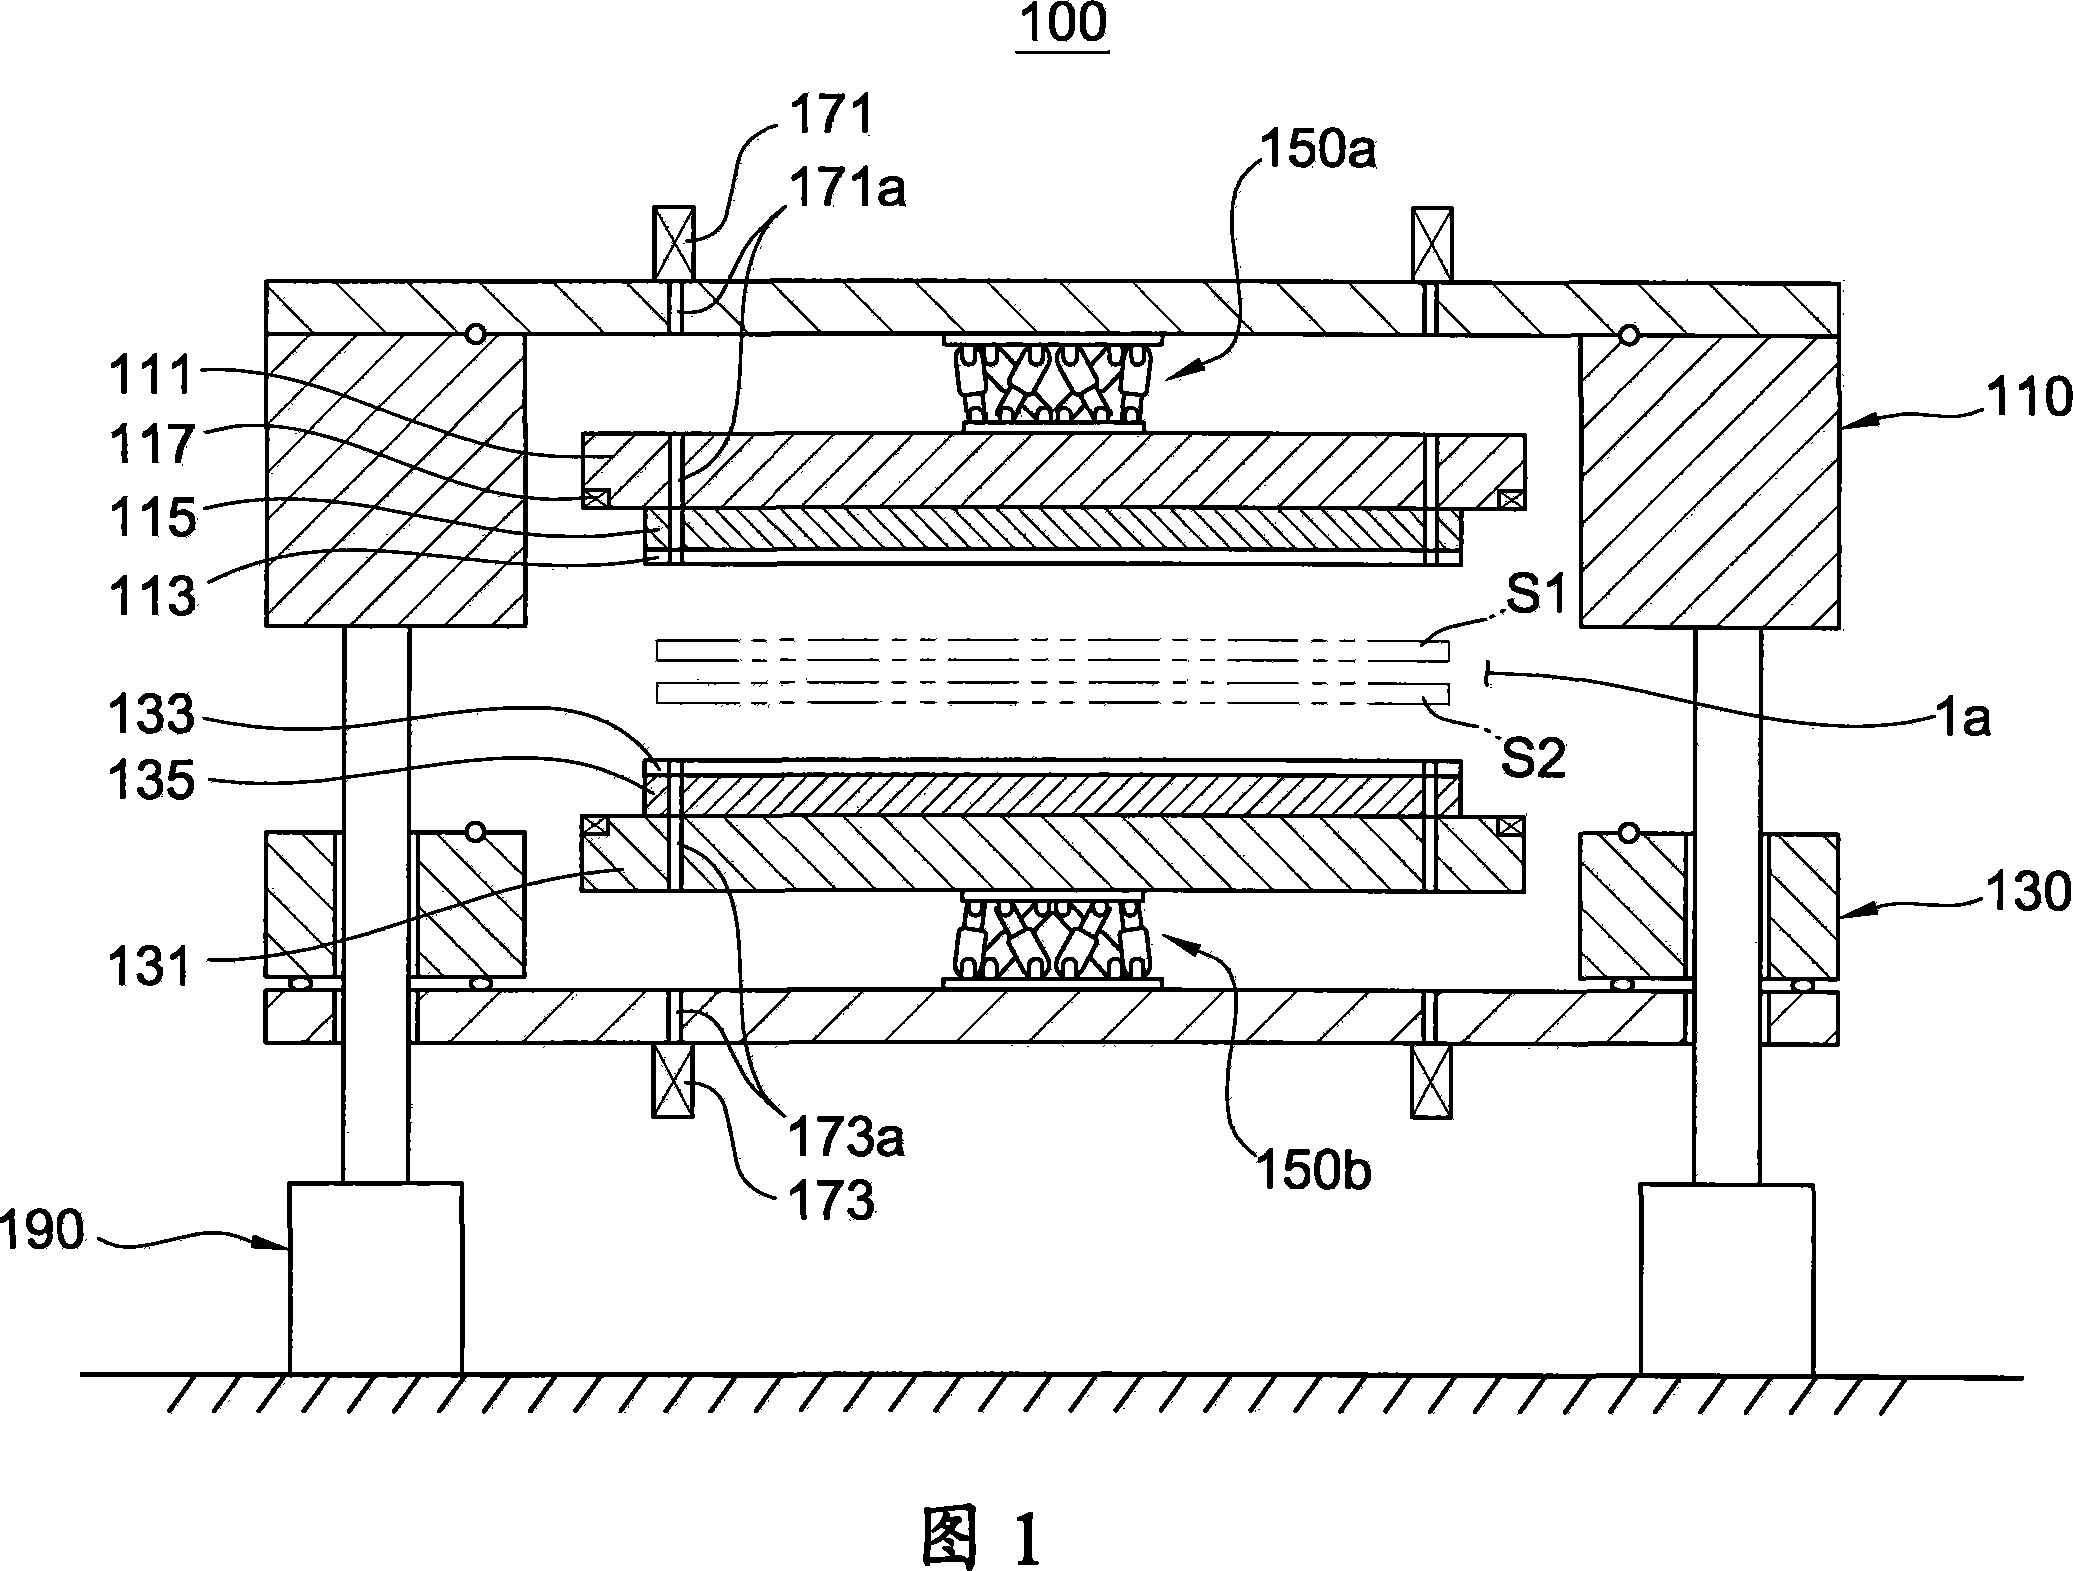 Substrate bonding apparatus having alignment unit and method of aligning substrates using the same